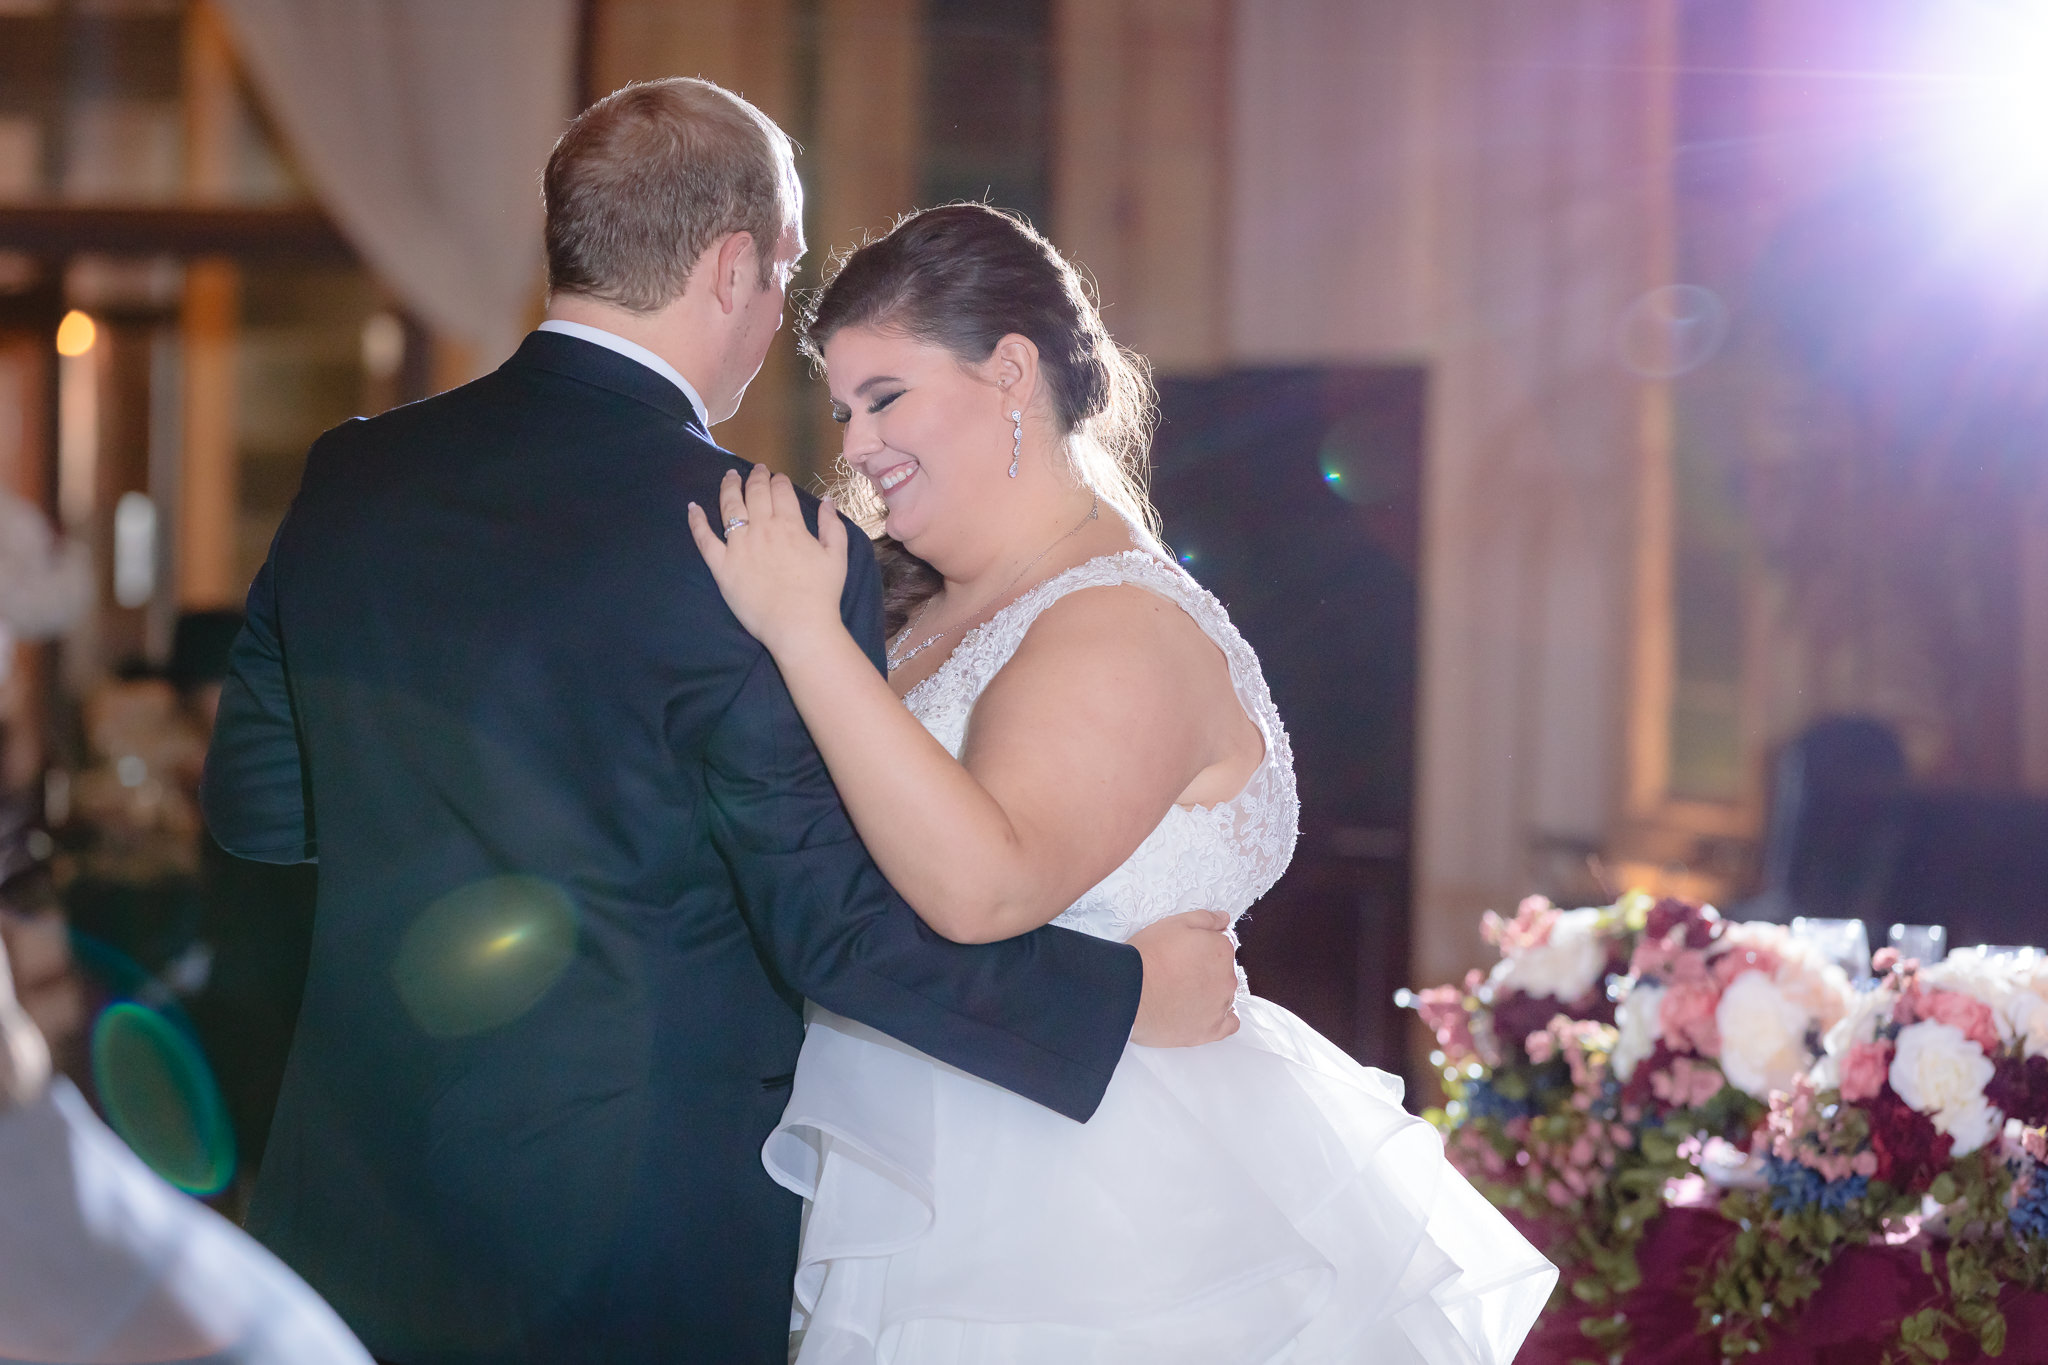 A smiling bride during the couple's first dance at the Pennsylvanian